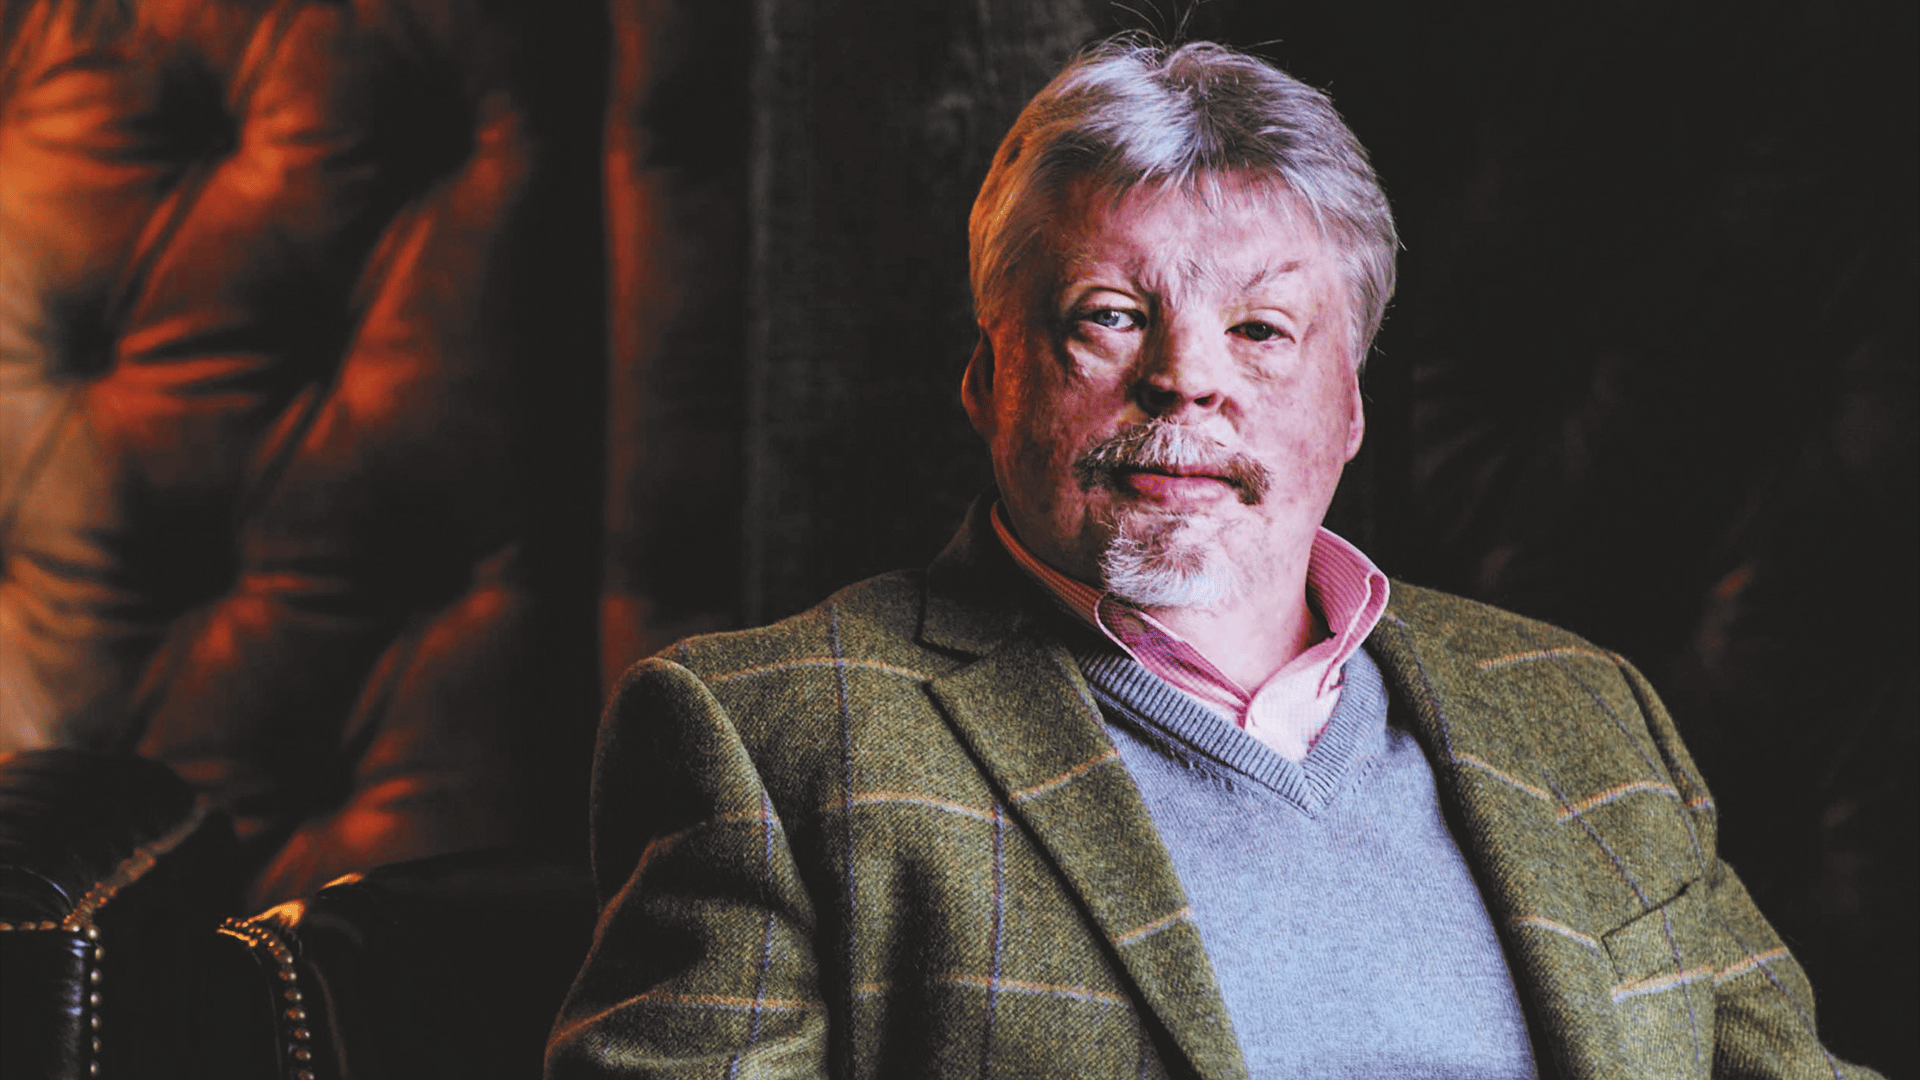 Right-hand side, Simon Weston, sitting in front of a leather chair, wearing a shirt, jumper and tweed jacket, looking to the left side